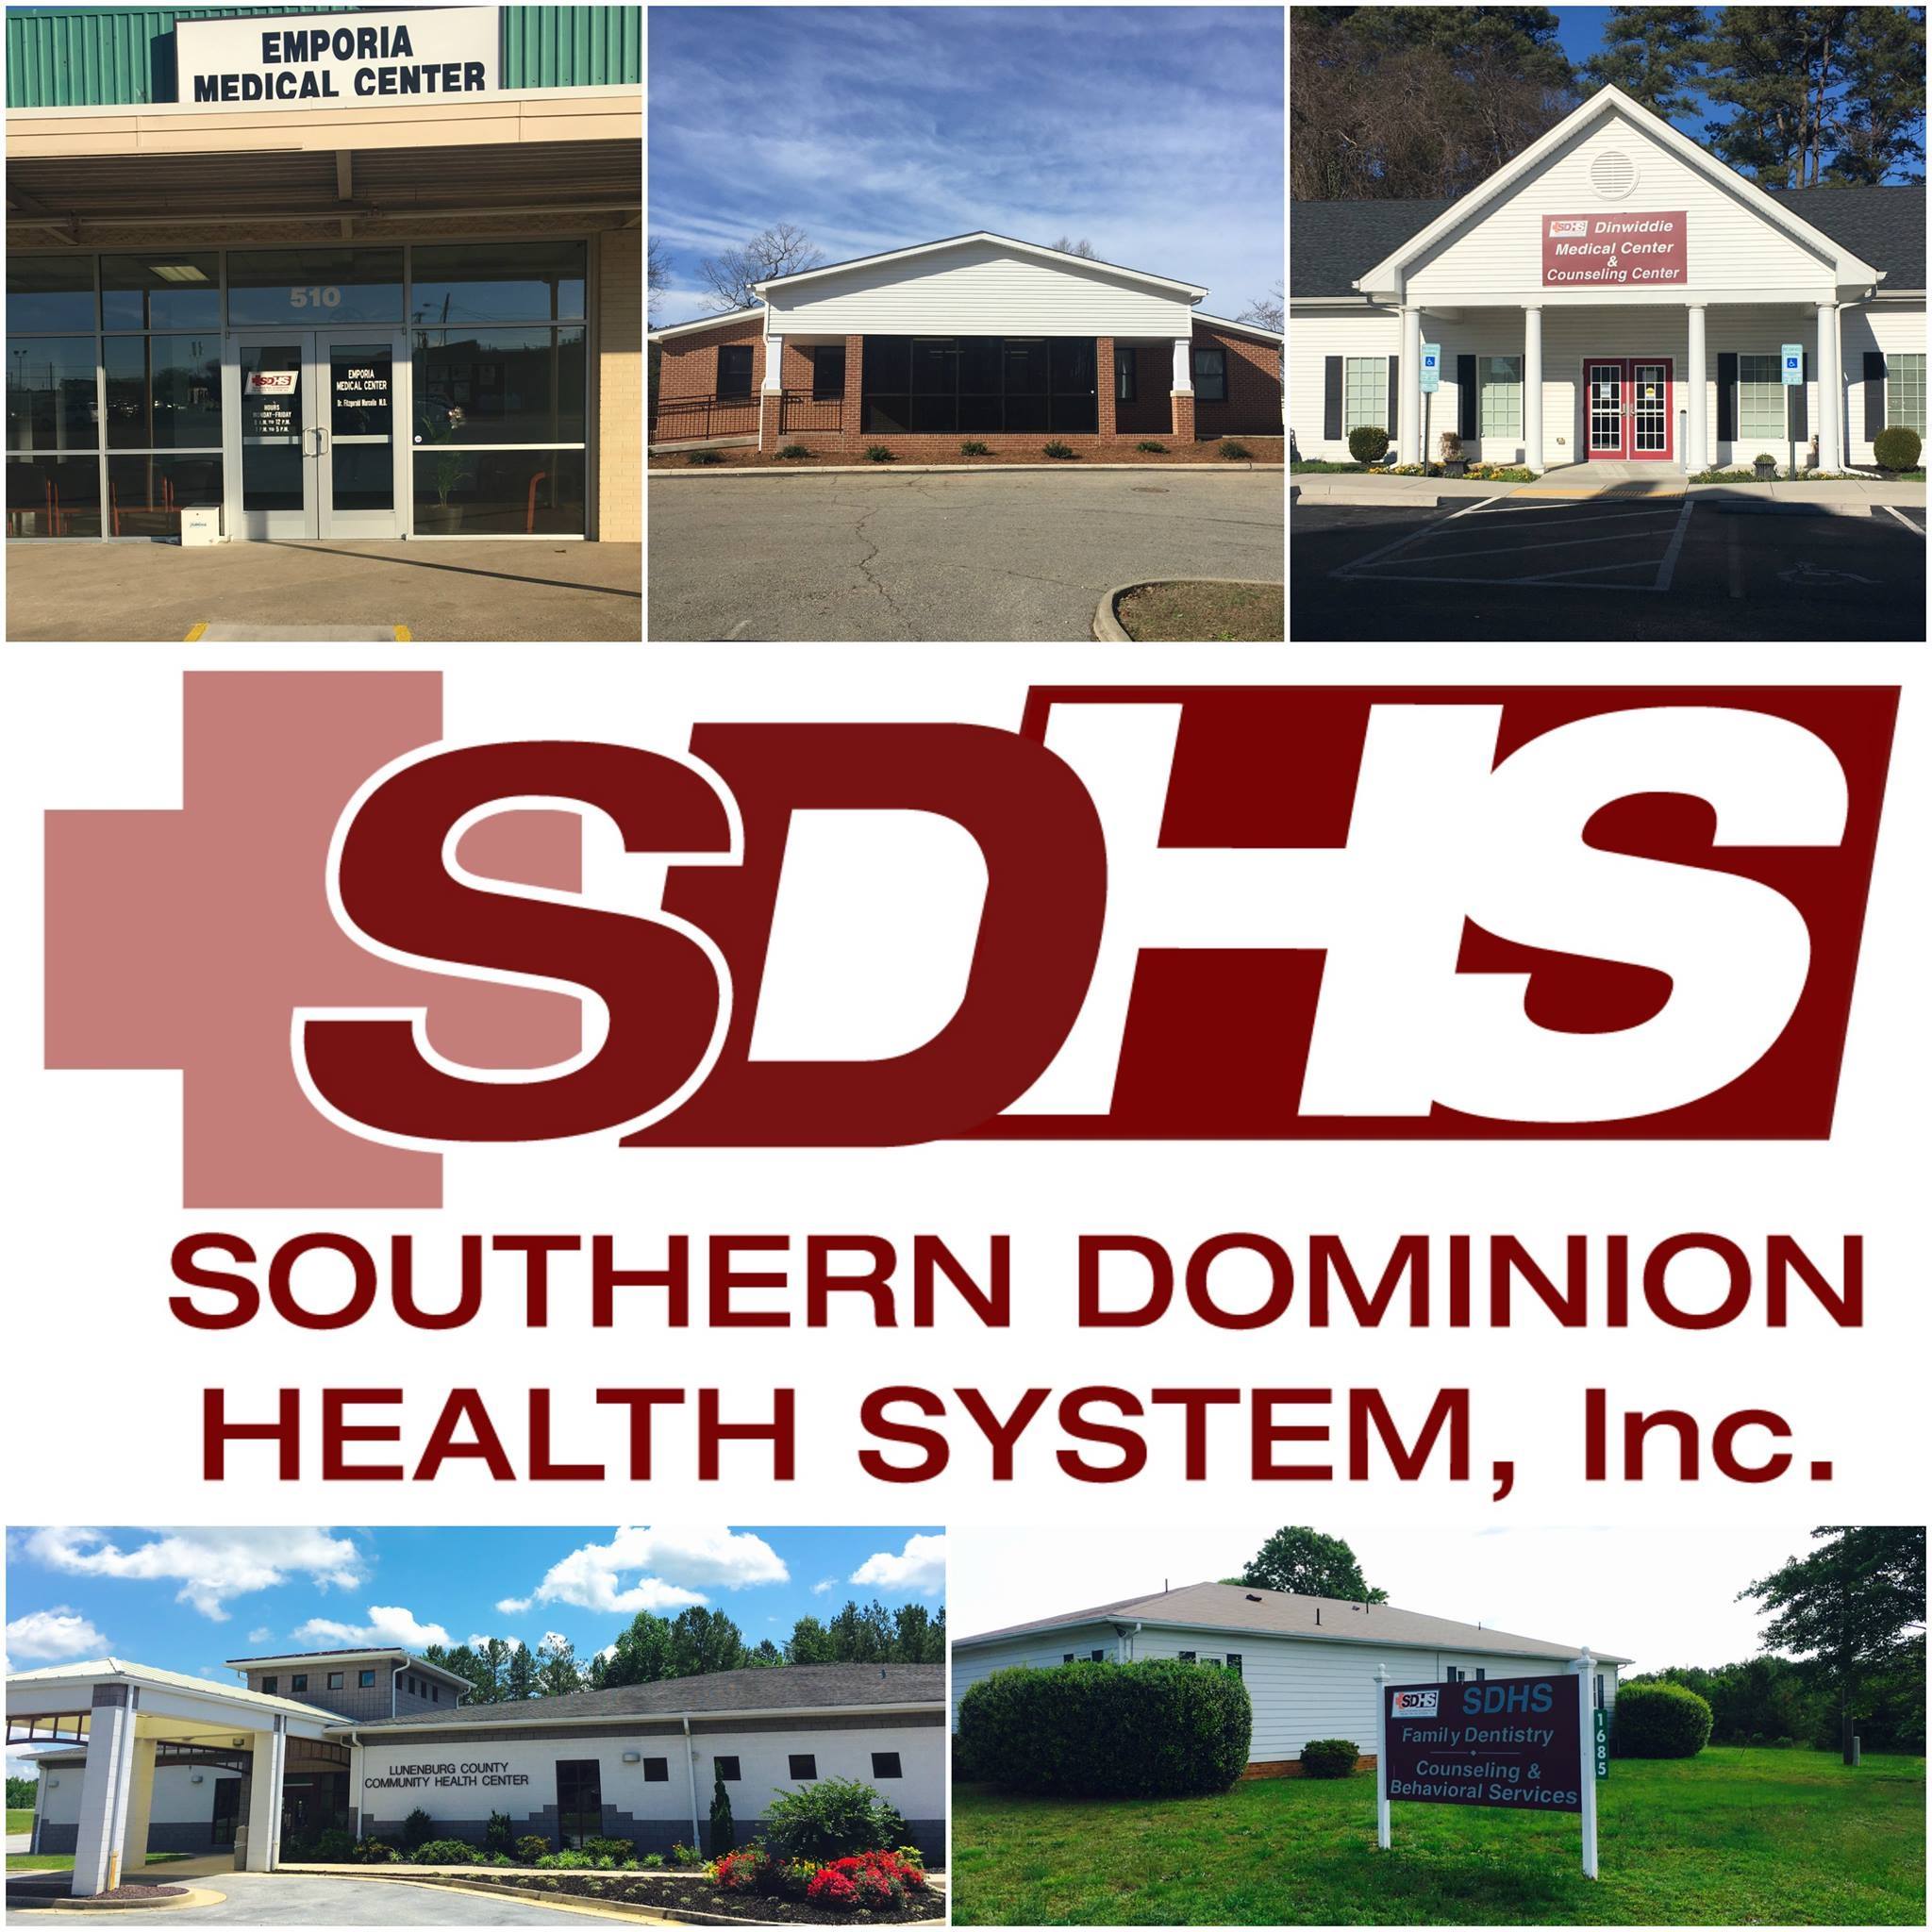 Women's Health and Birthing Center - Southern Dominion Health Systems, Inc.